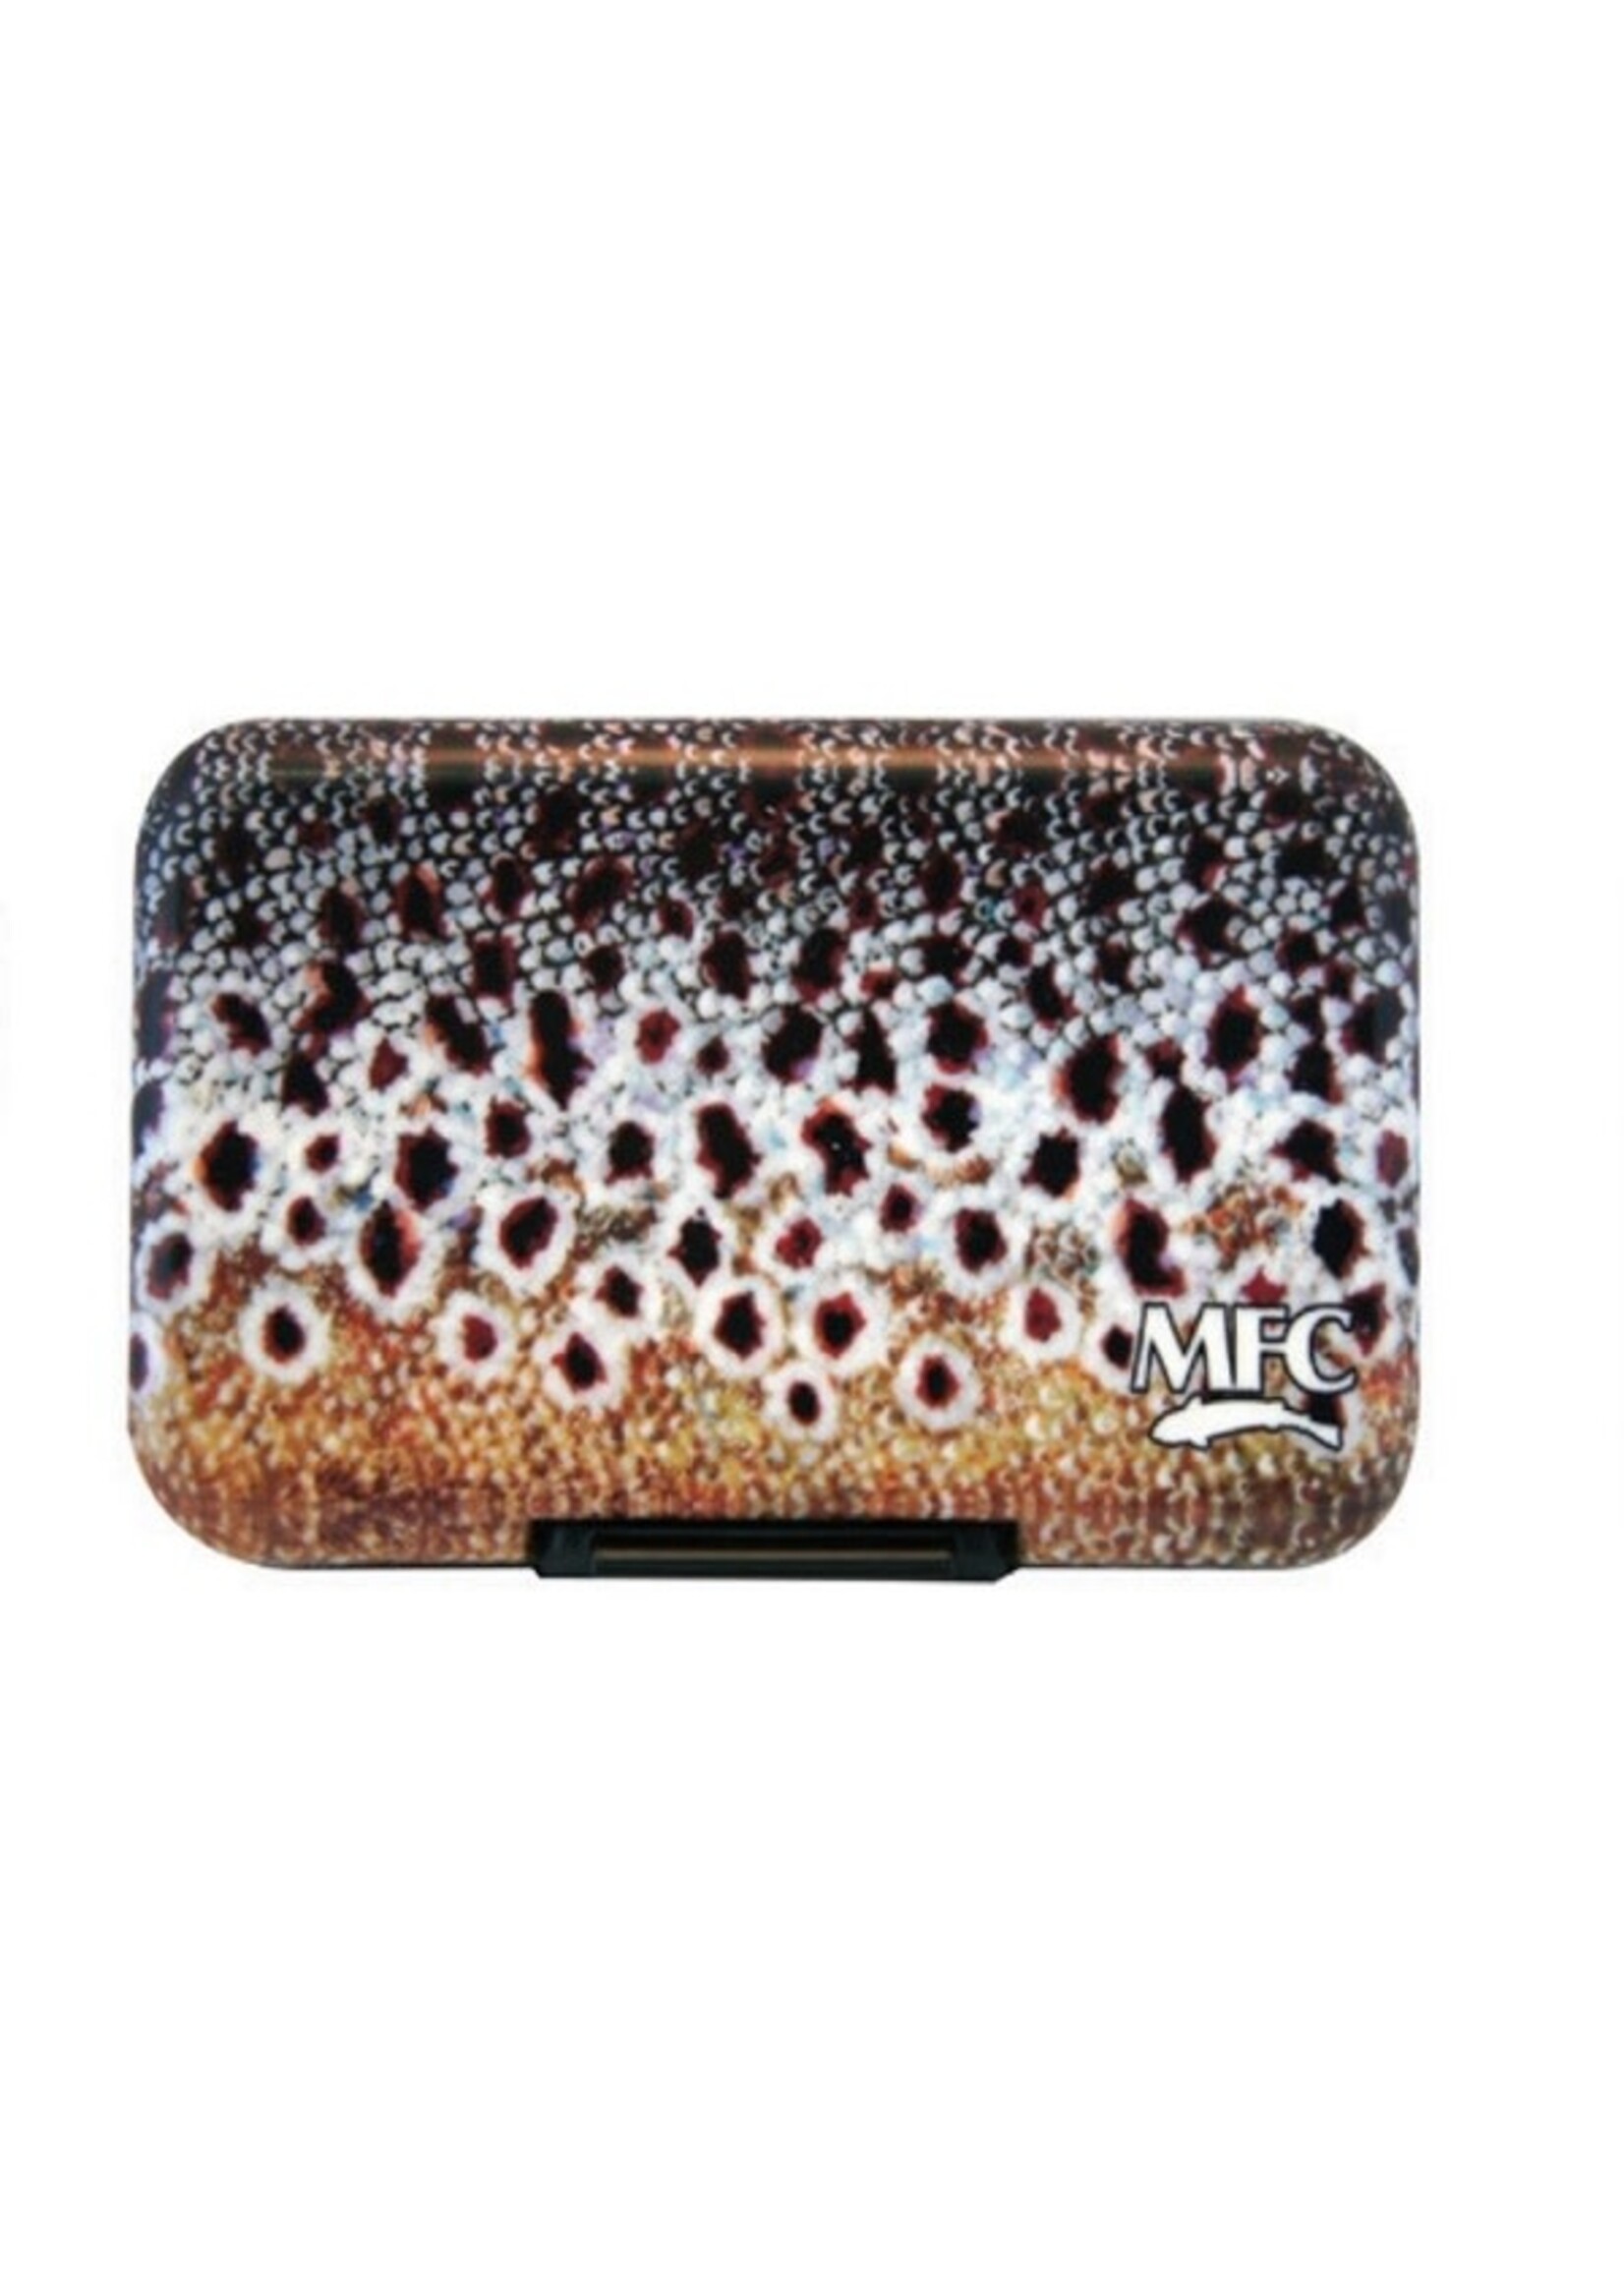 Montana Fly Company MFC Poly Fly Box - Sundell's Brown Trout Skin